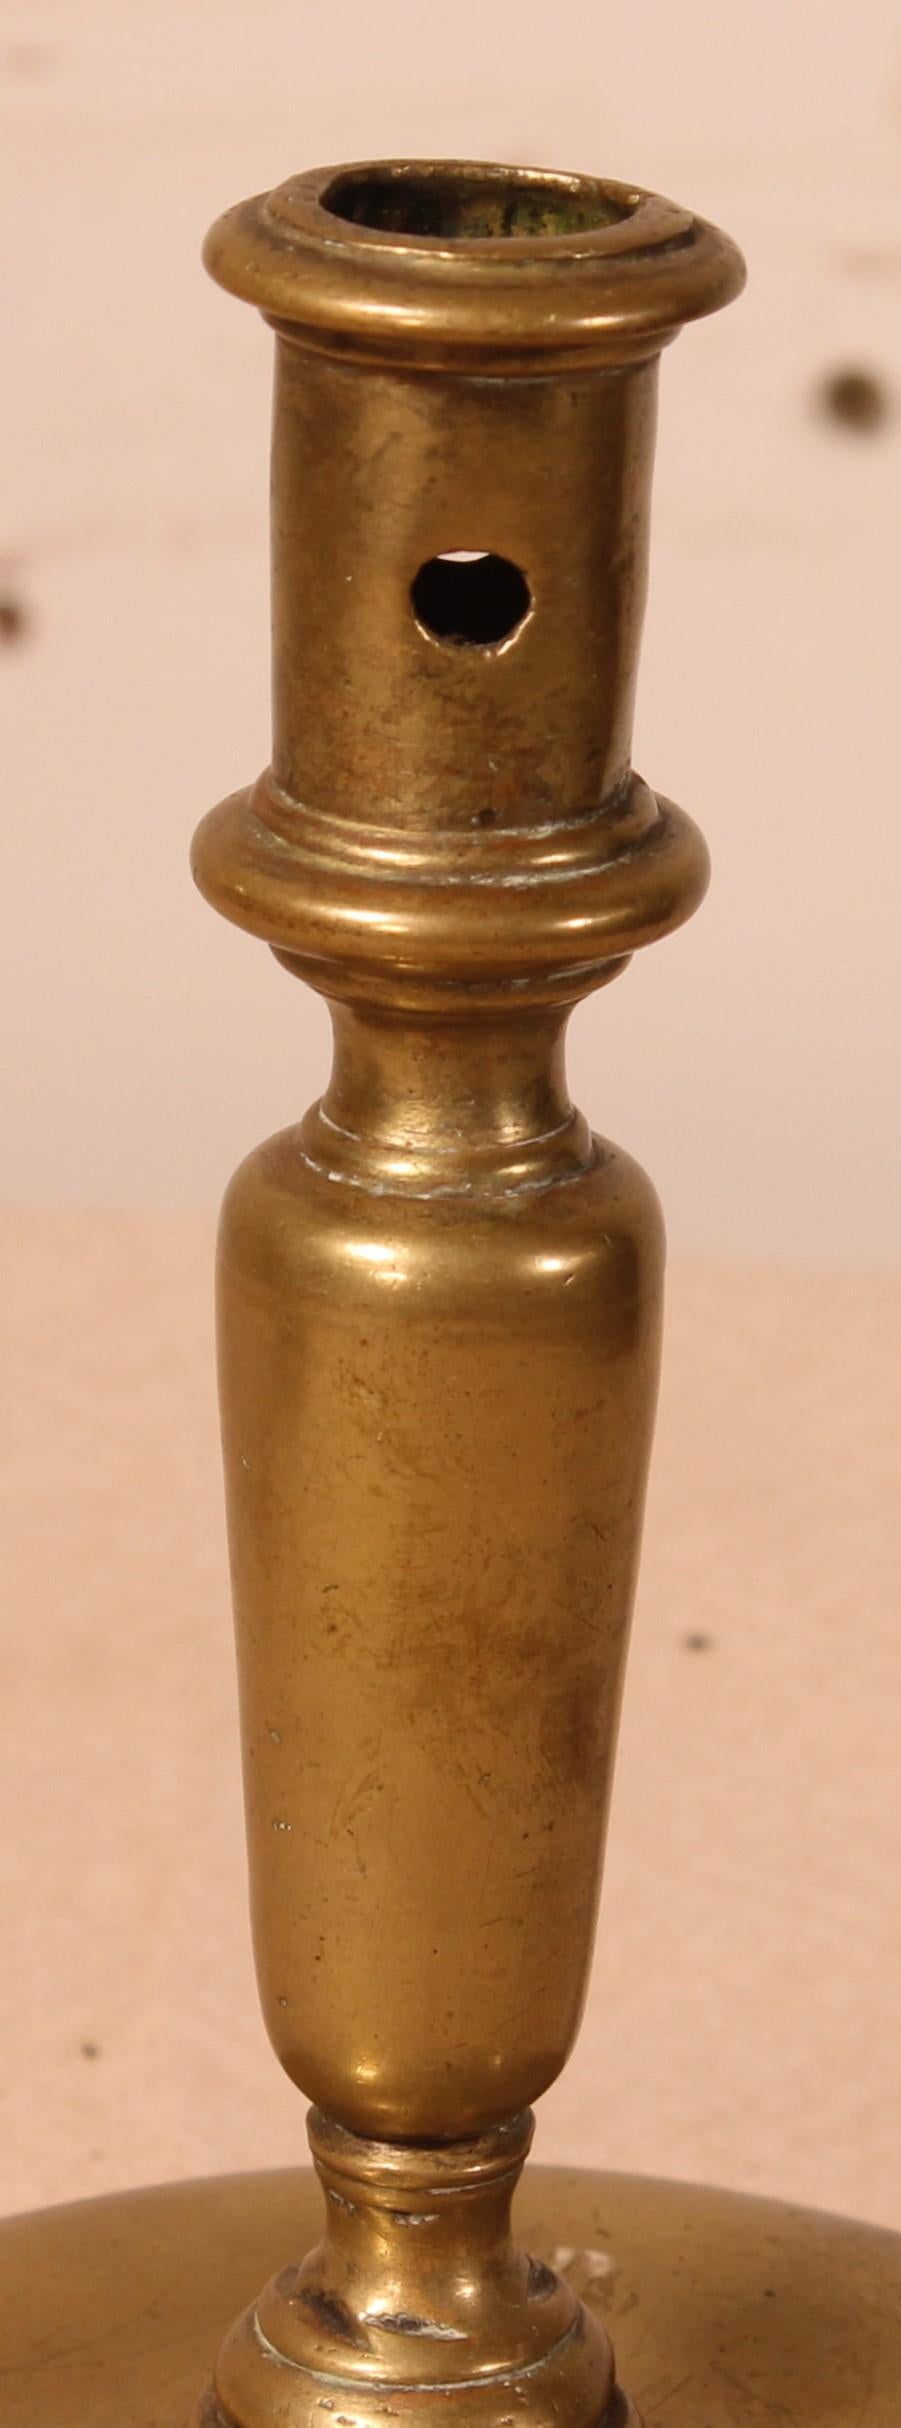 Spanish Renaissance candlestick in brass circa 1600
Beautiful patina and in very good condition